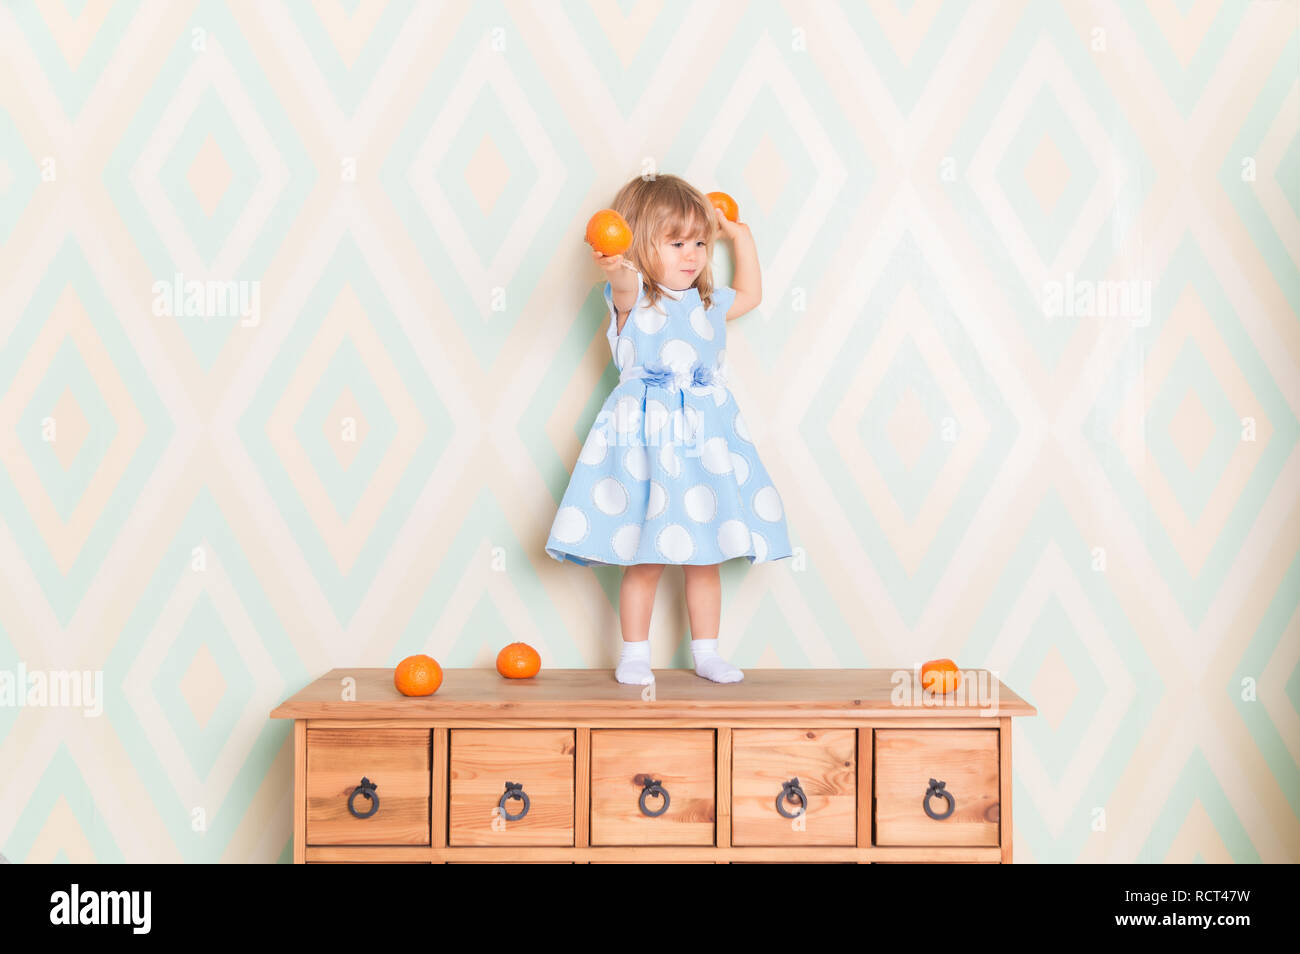 Toddler child girl in blue dress standing on wooden chest of drawers and holding fresh orange mandarins in her hands and going to throw them on rhomb wallpaper background. Winter holidays or christmas Stock Photo